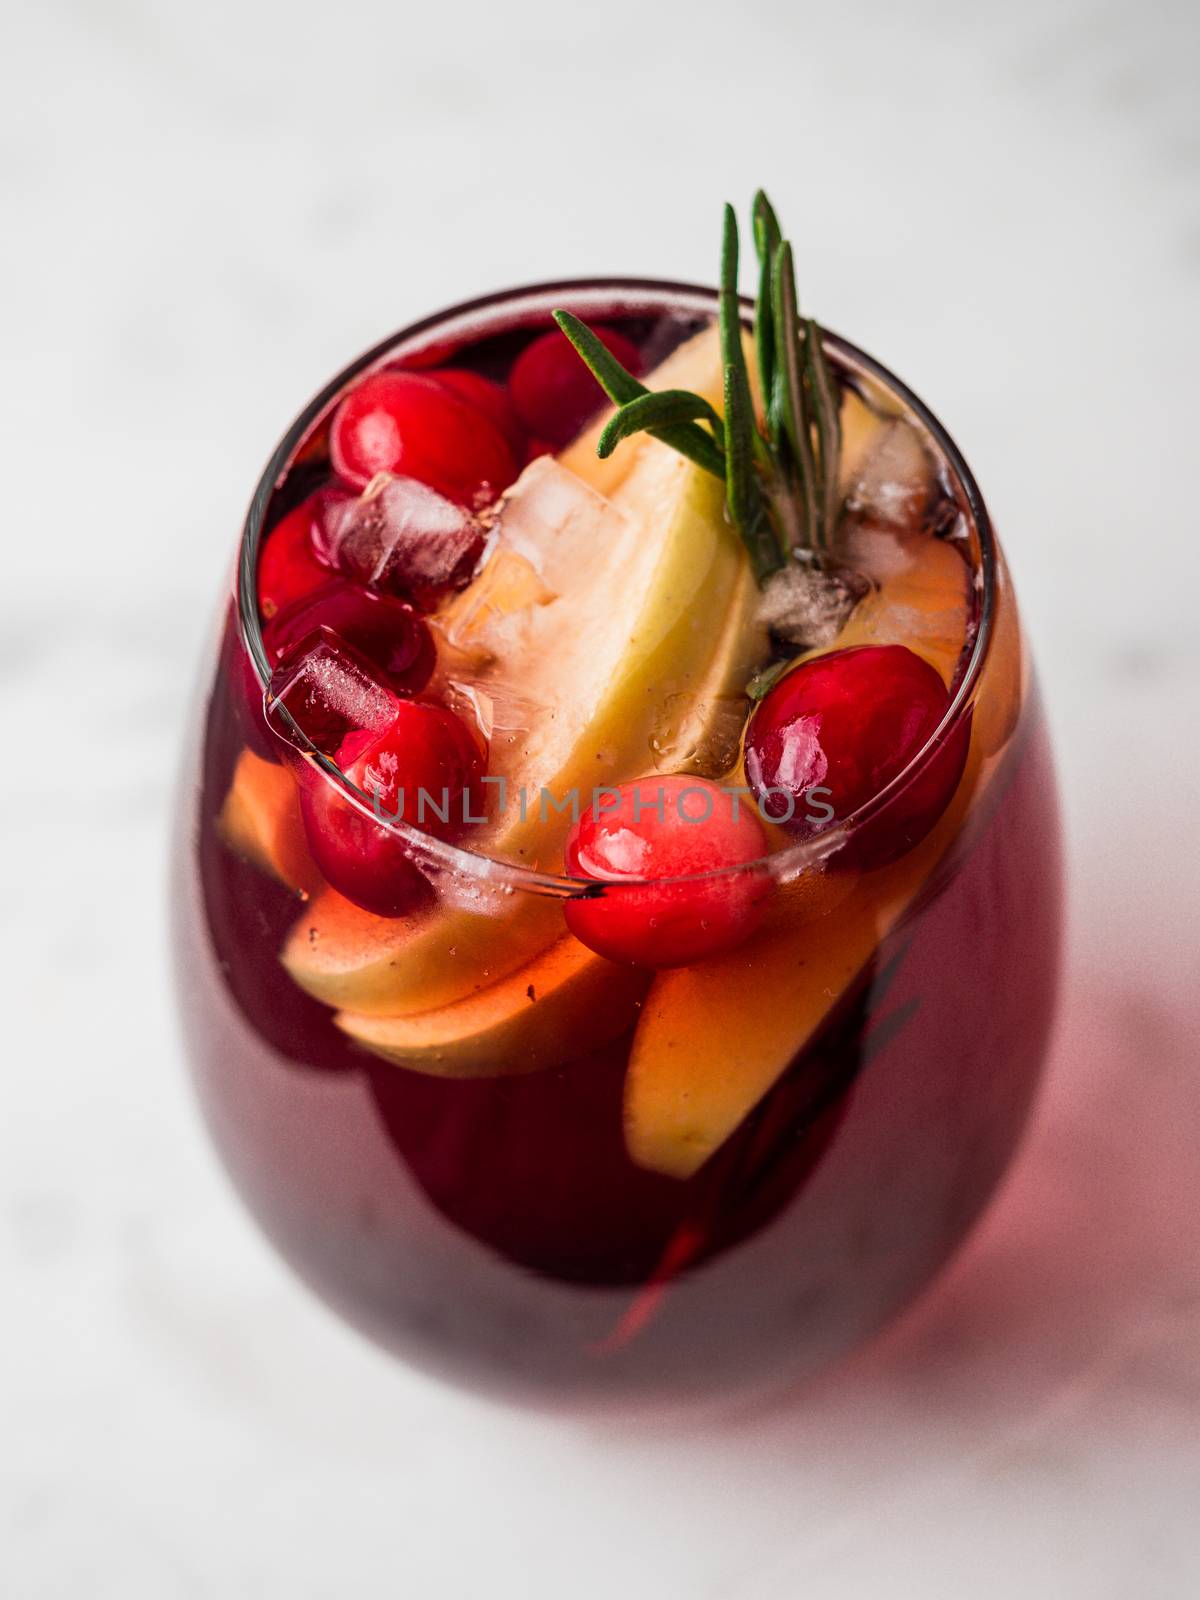 Winter sangria on tabletop with gray linen tablecloth. Glasses of sangria with fruit slice, cranberry and rosemary. Vertical.